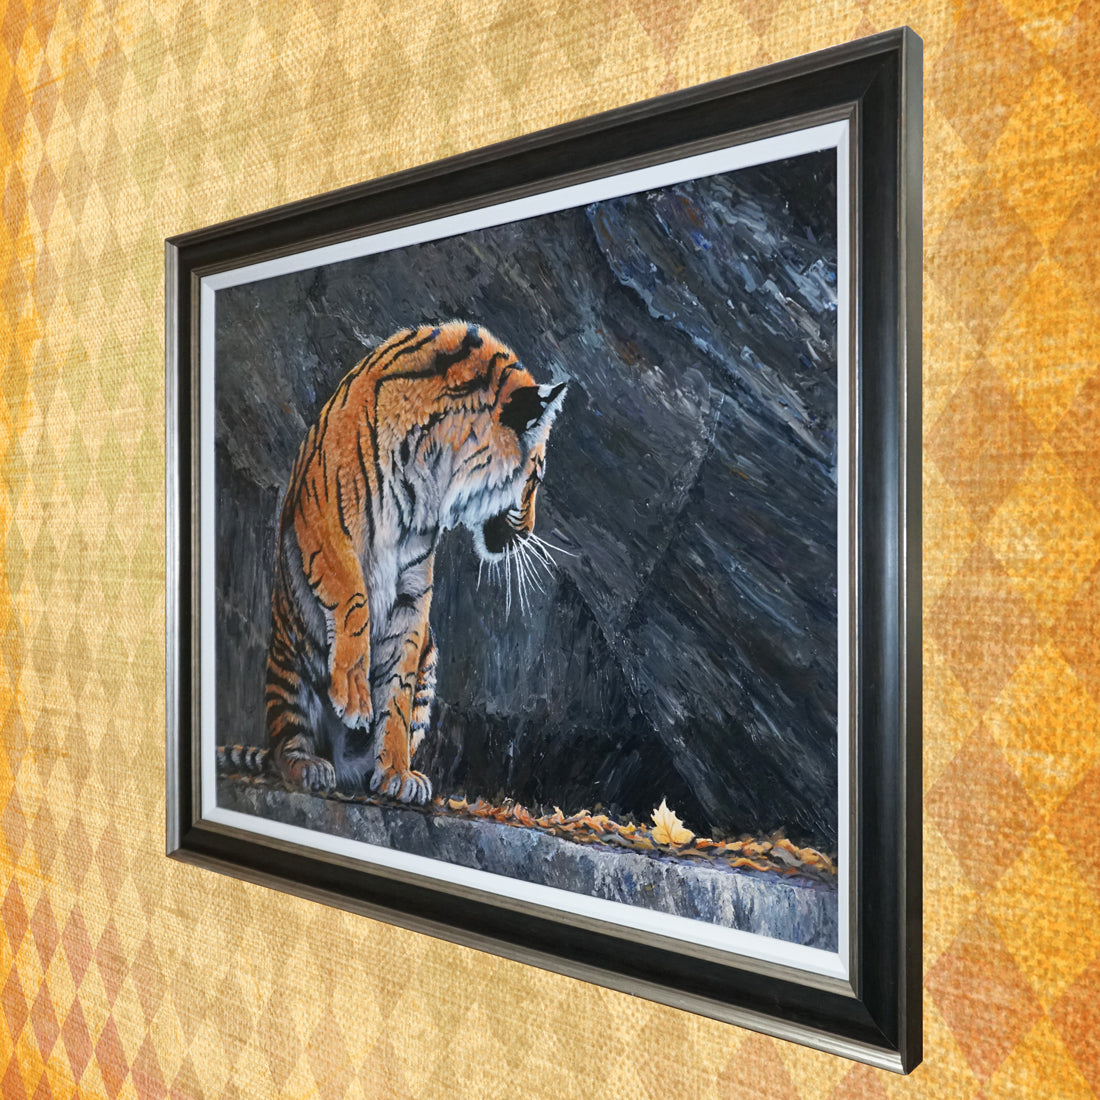 Mesmerized original painting perspective by Sue Payton